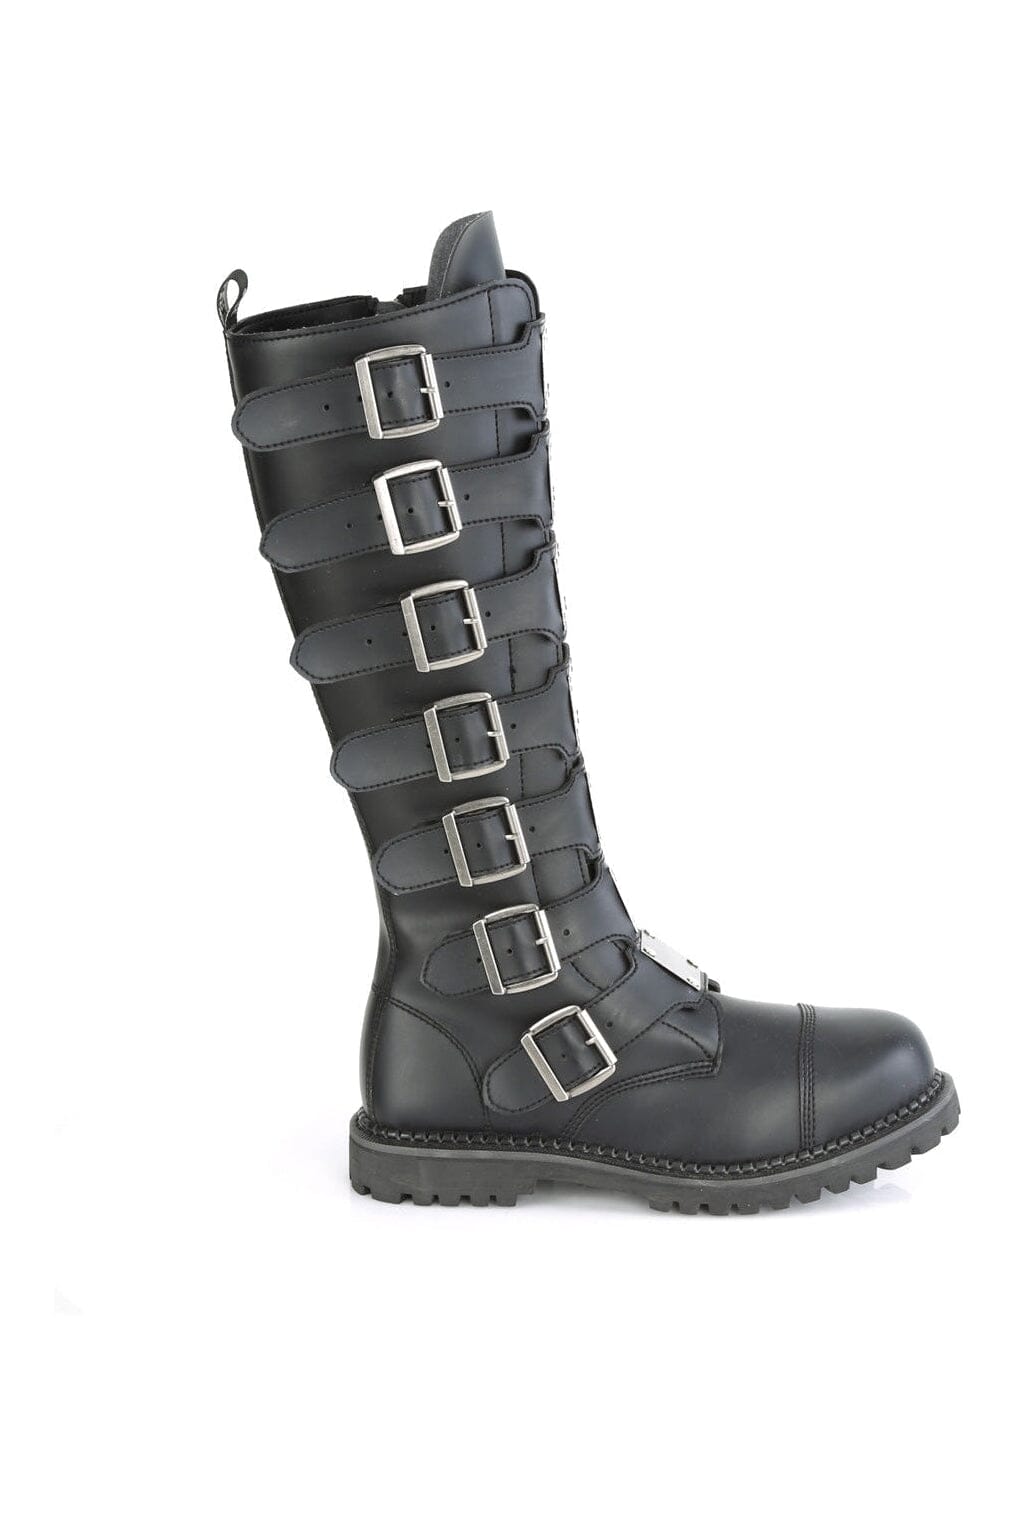 RIOT-21MP Black Vegan Leather Knee Boot-Knee Boots-Demonia-SEXYSHOES.COM